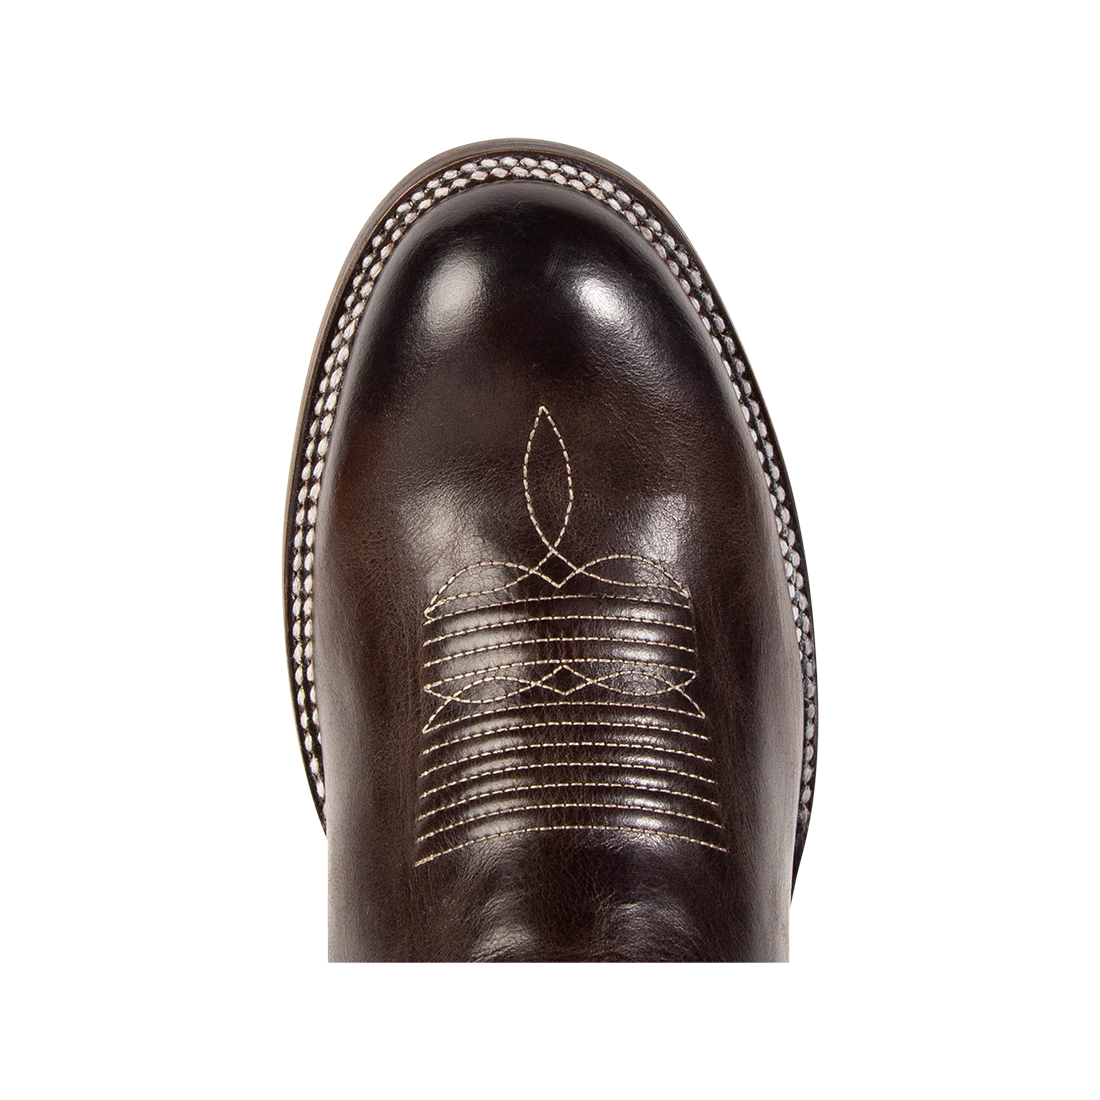 Top view showing traditional toe stitch on FREEBIRD men's Bison brown cowboy boot